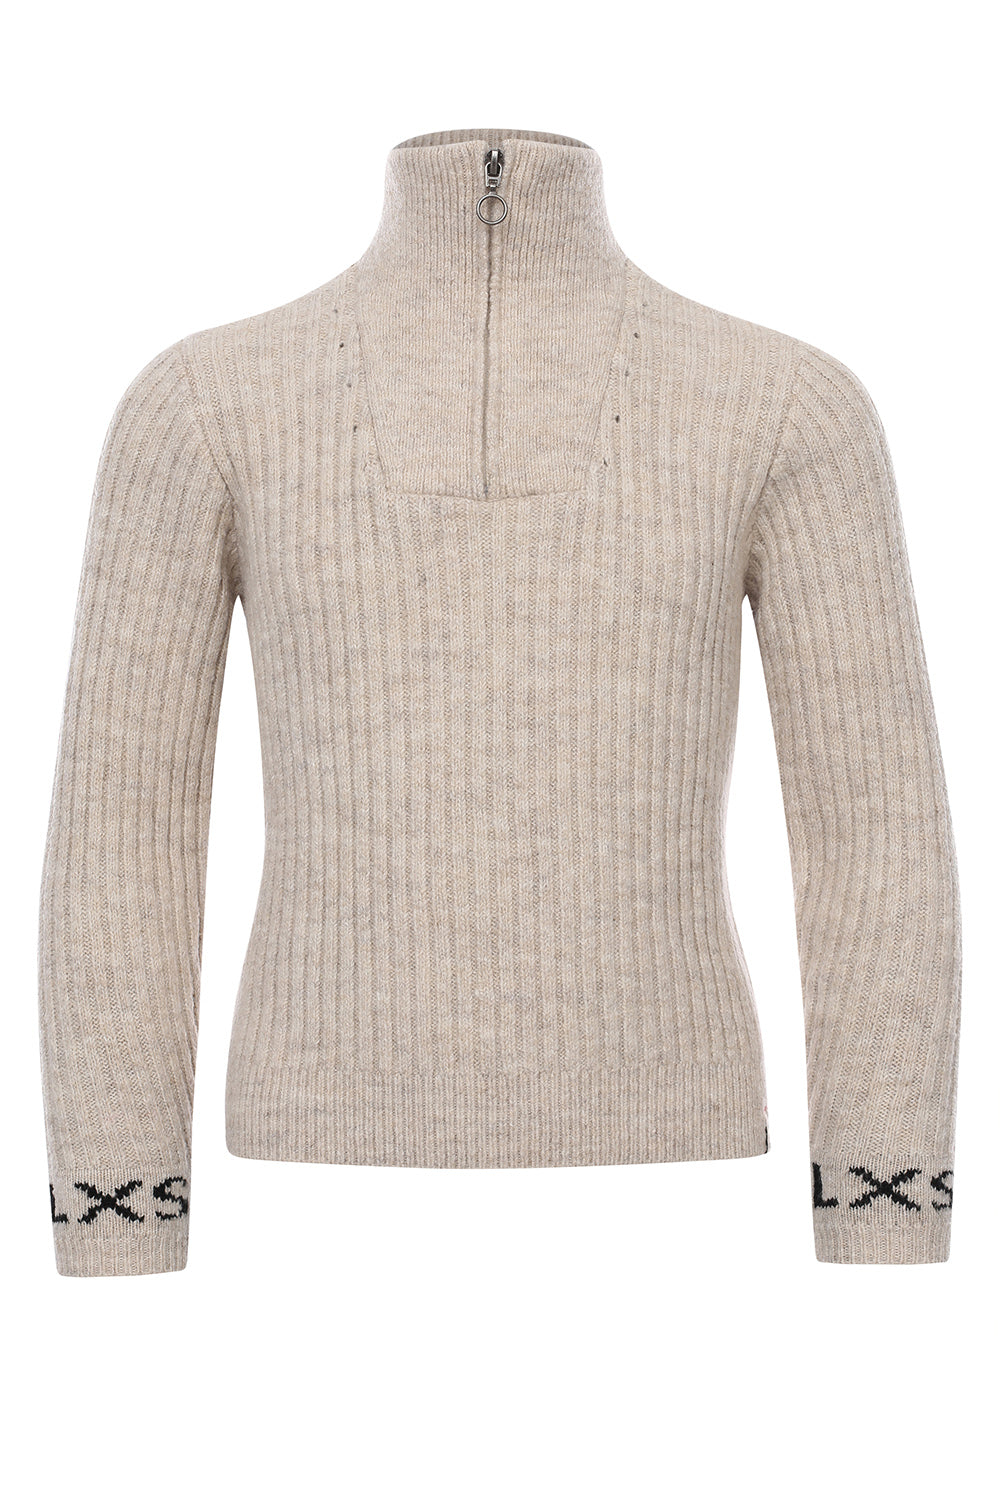 Looxs 10sixteen Knitted Rib Pullover